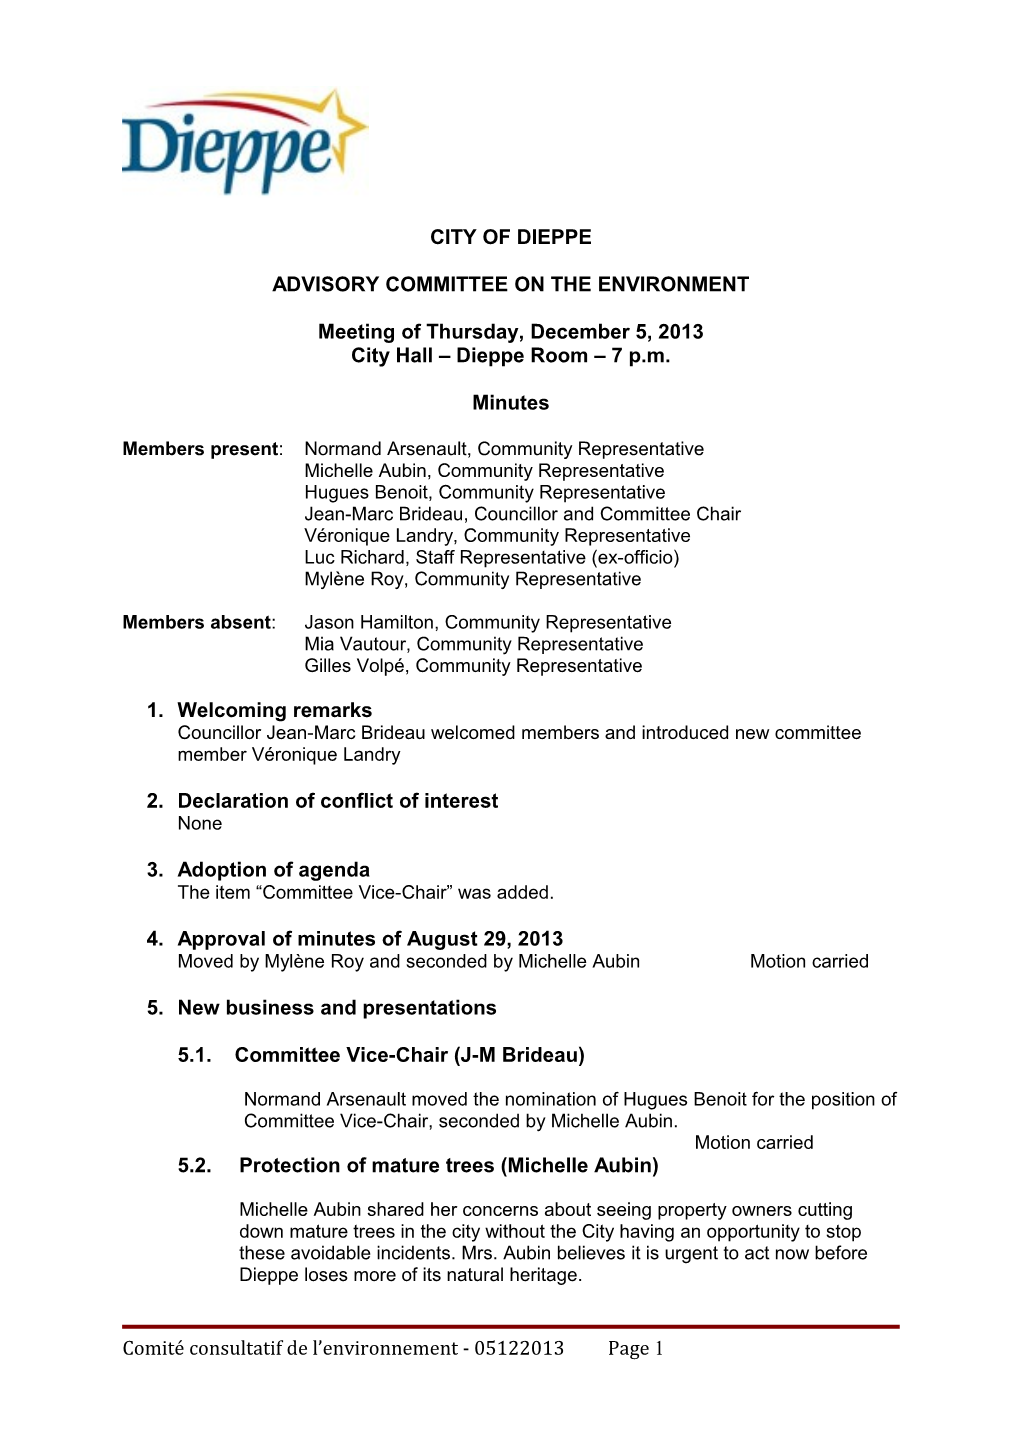 Advisory Committee on the Environment